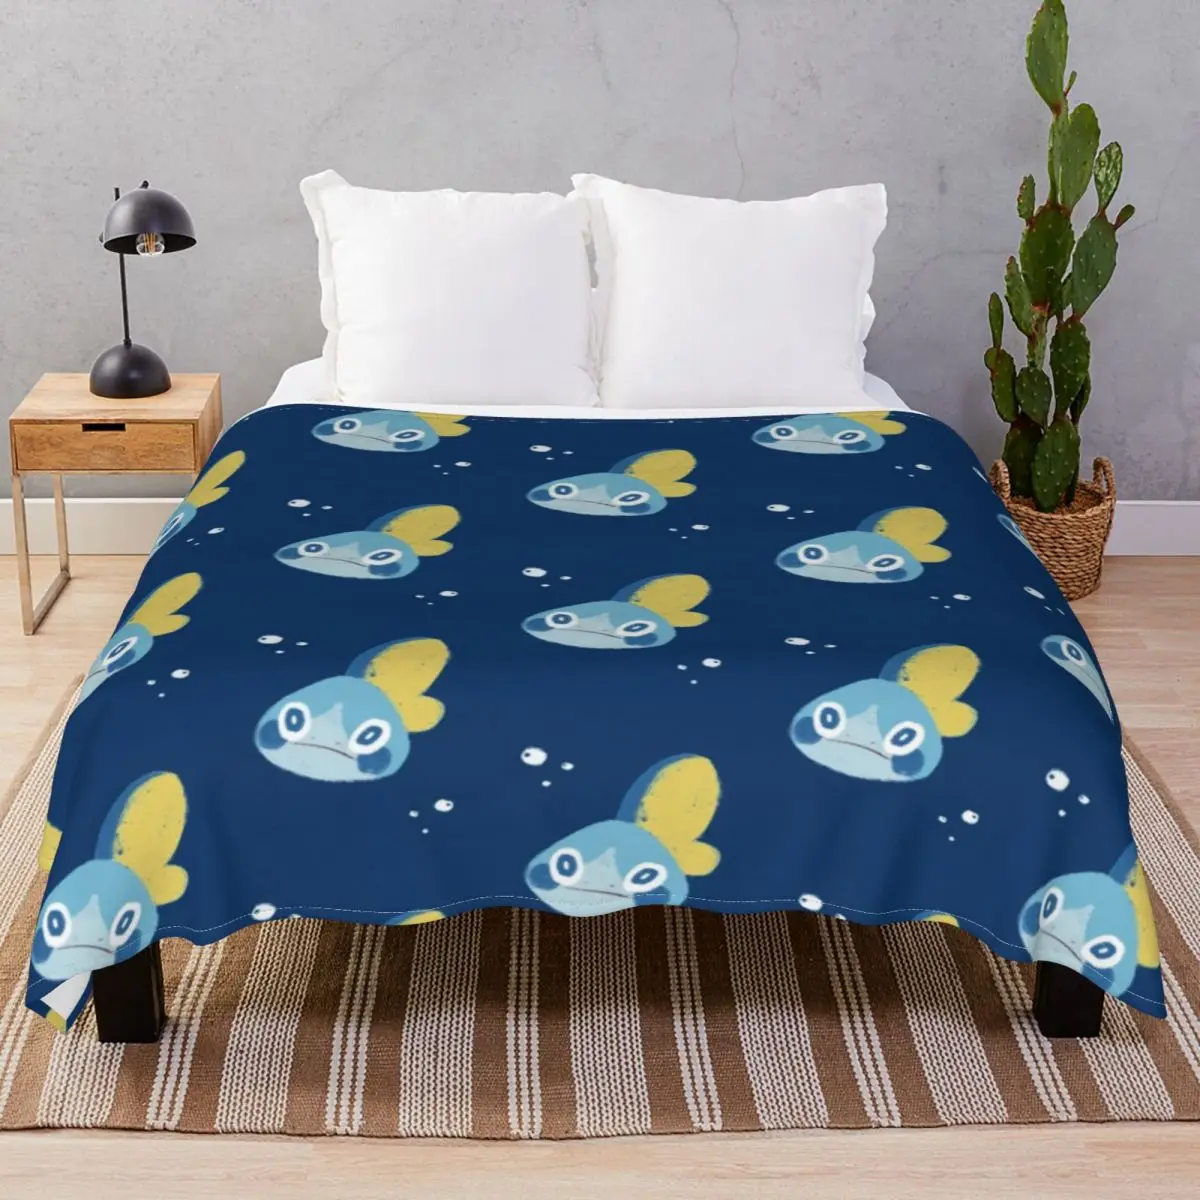 Sobble Blankets Fleece Decoration Portable Unisex Throw Blanket for Bed Home Couch Camp Cinema